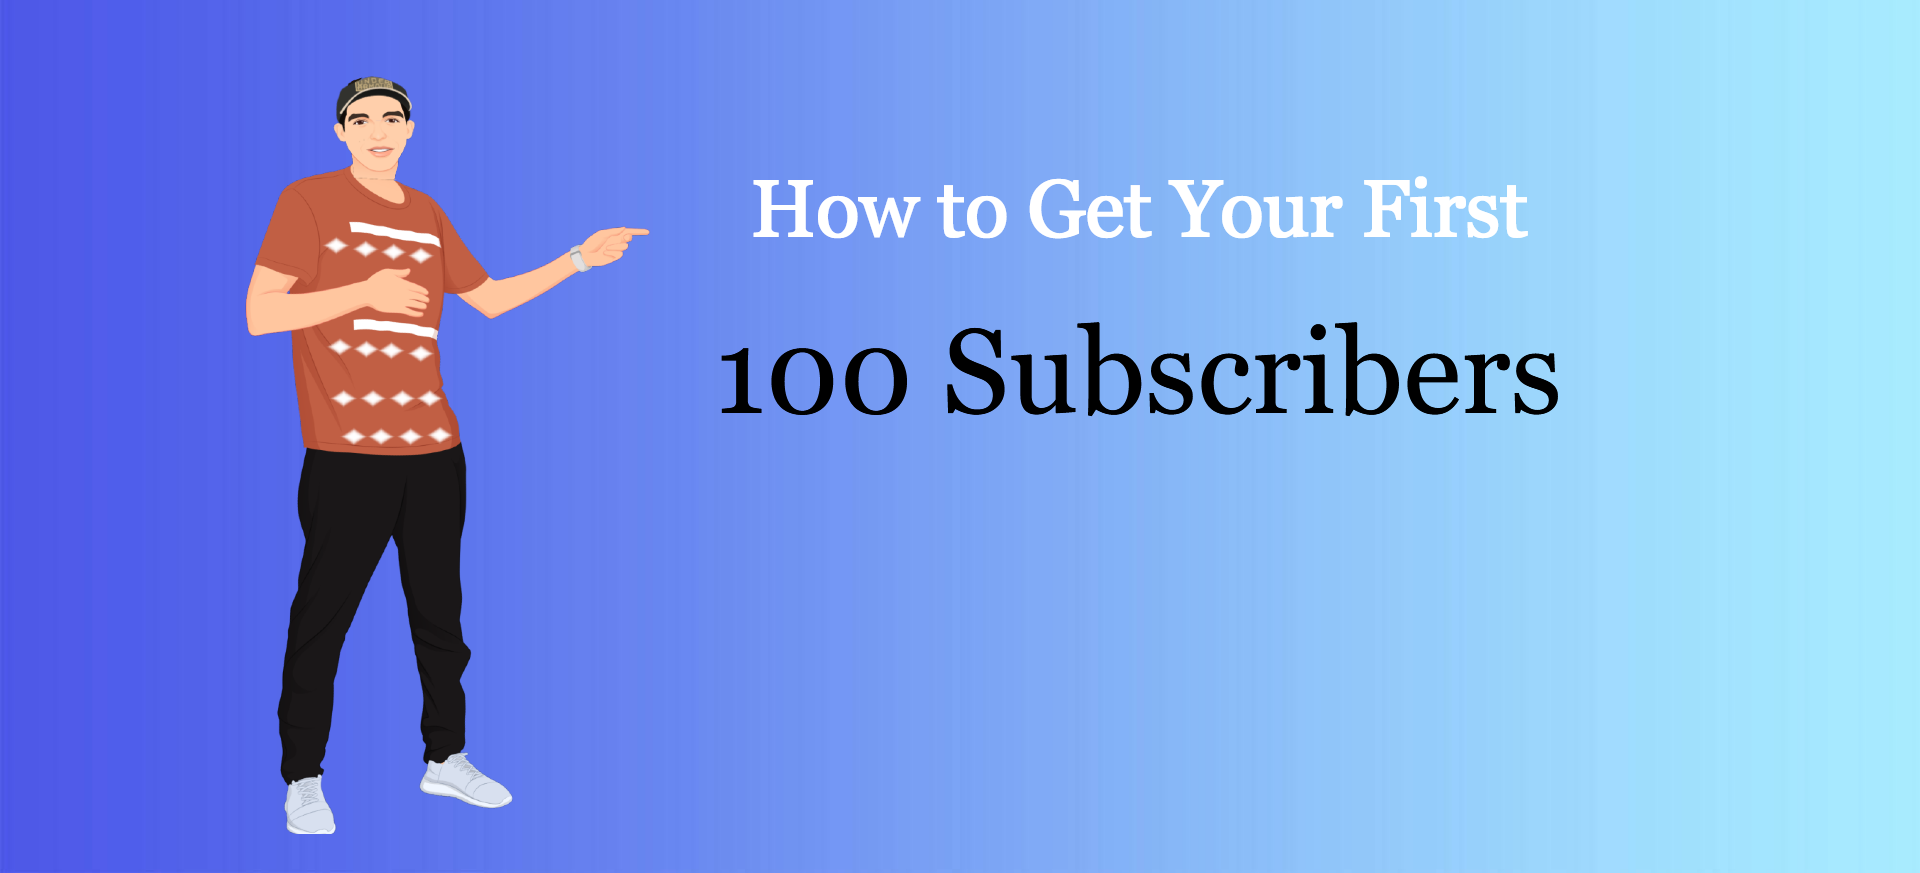 how to get my first 100 subscribers